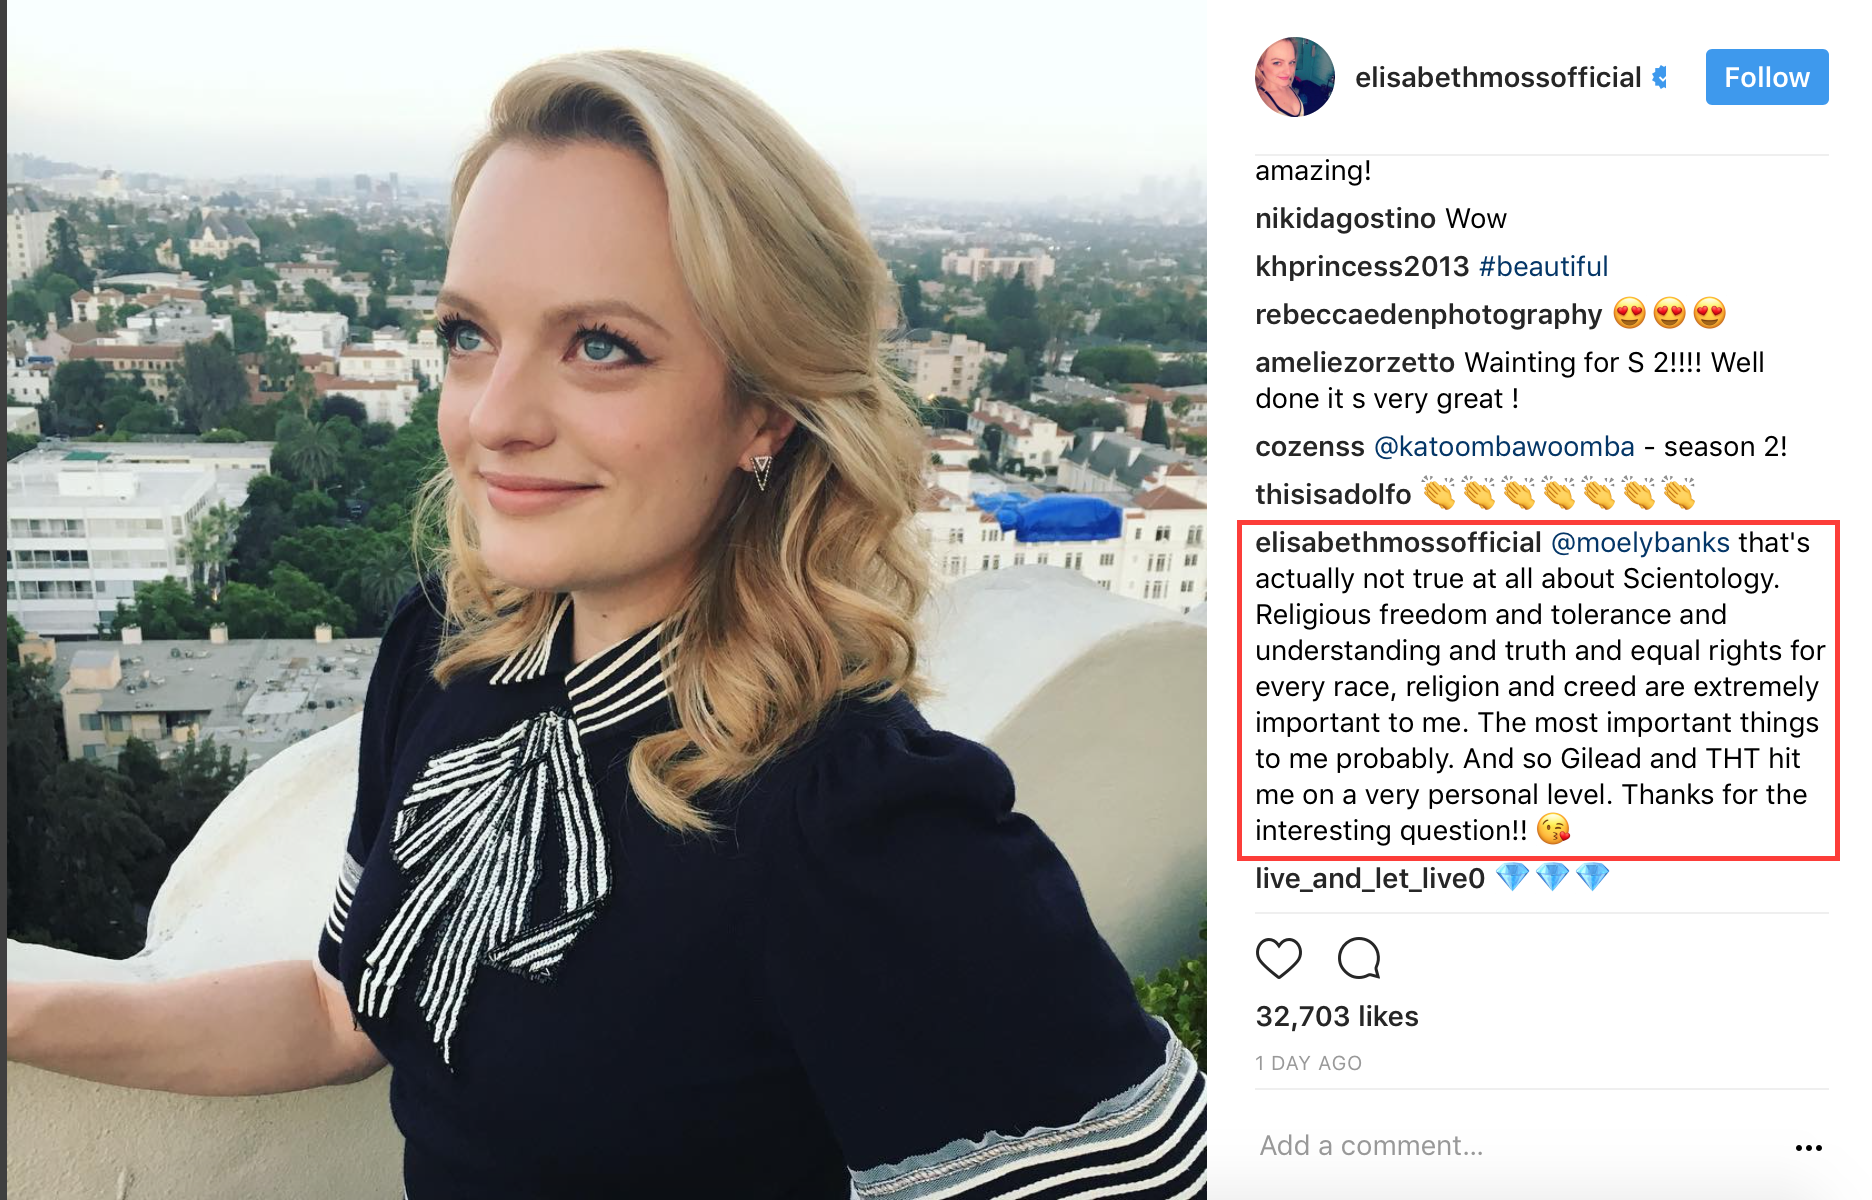 Elisabeth Moss finally addressed whether 'The Handmaid's Tale' made her question Scientology